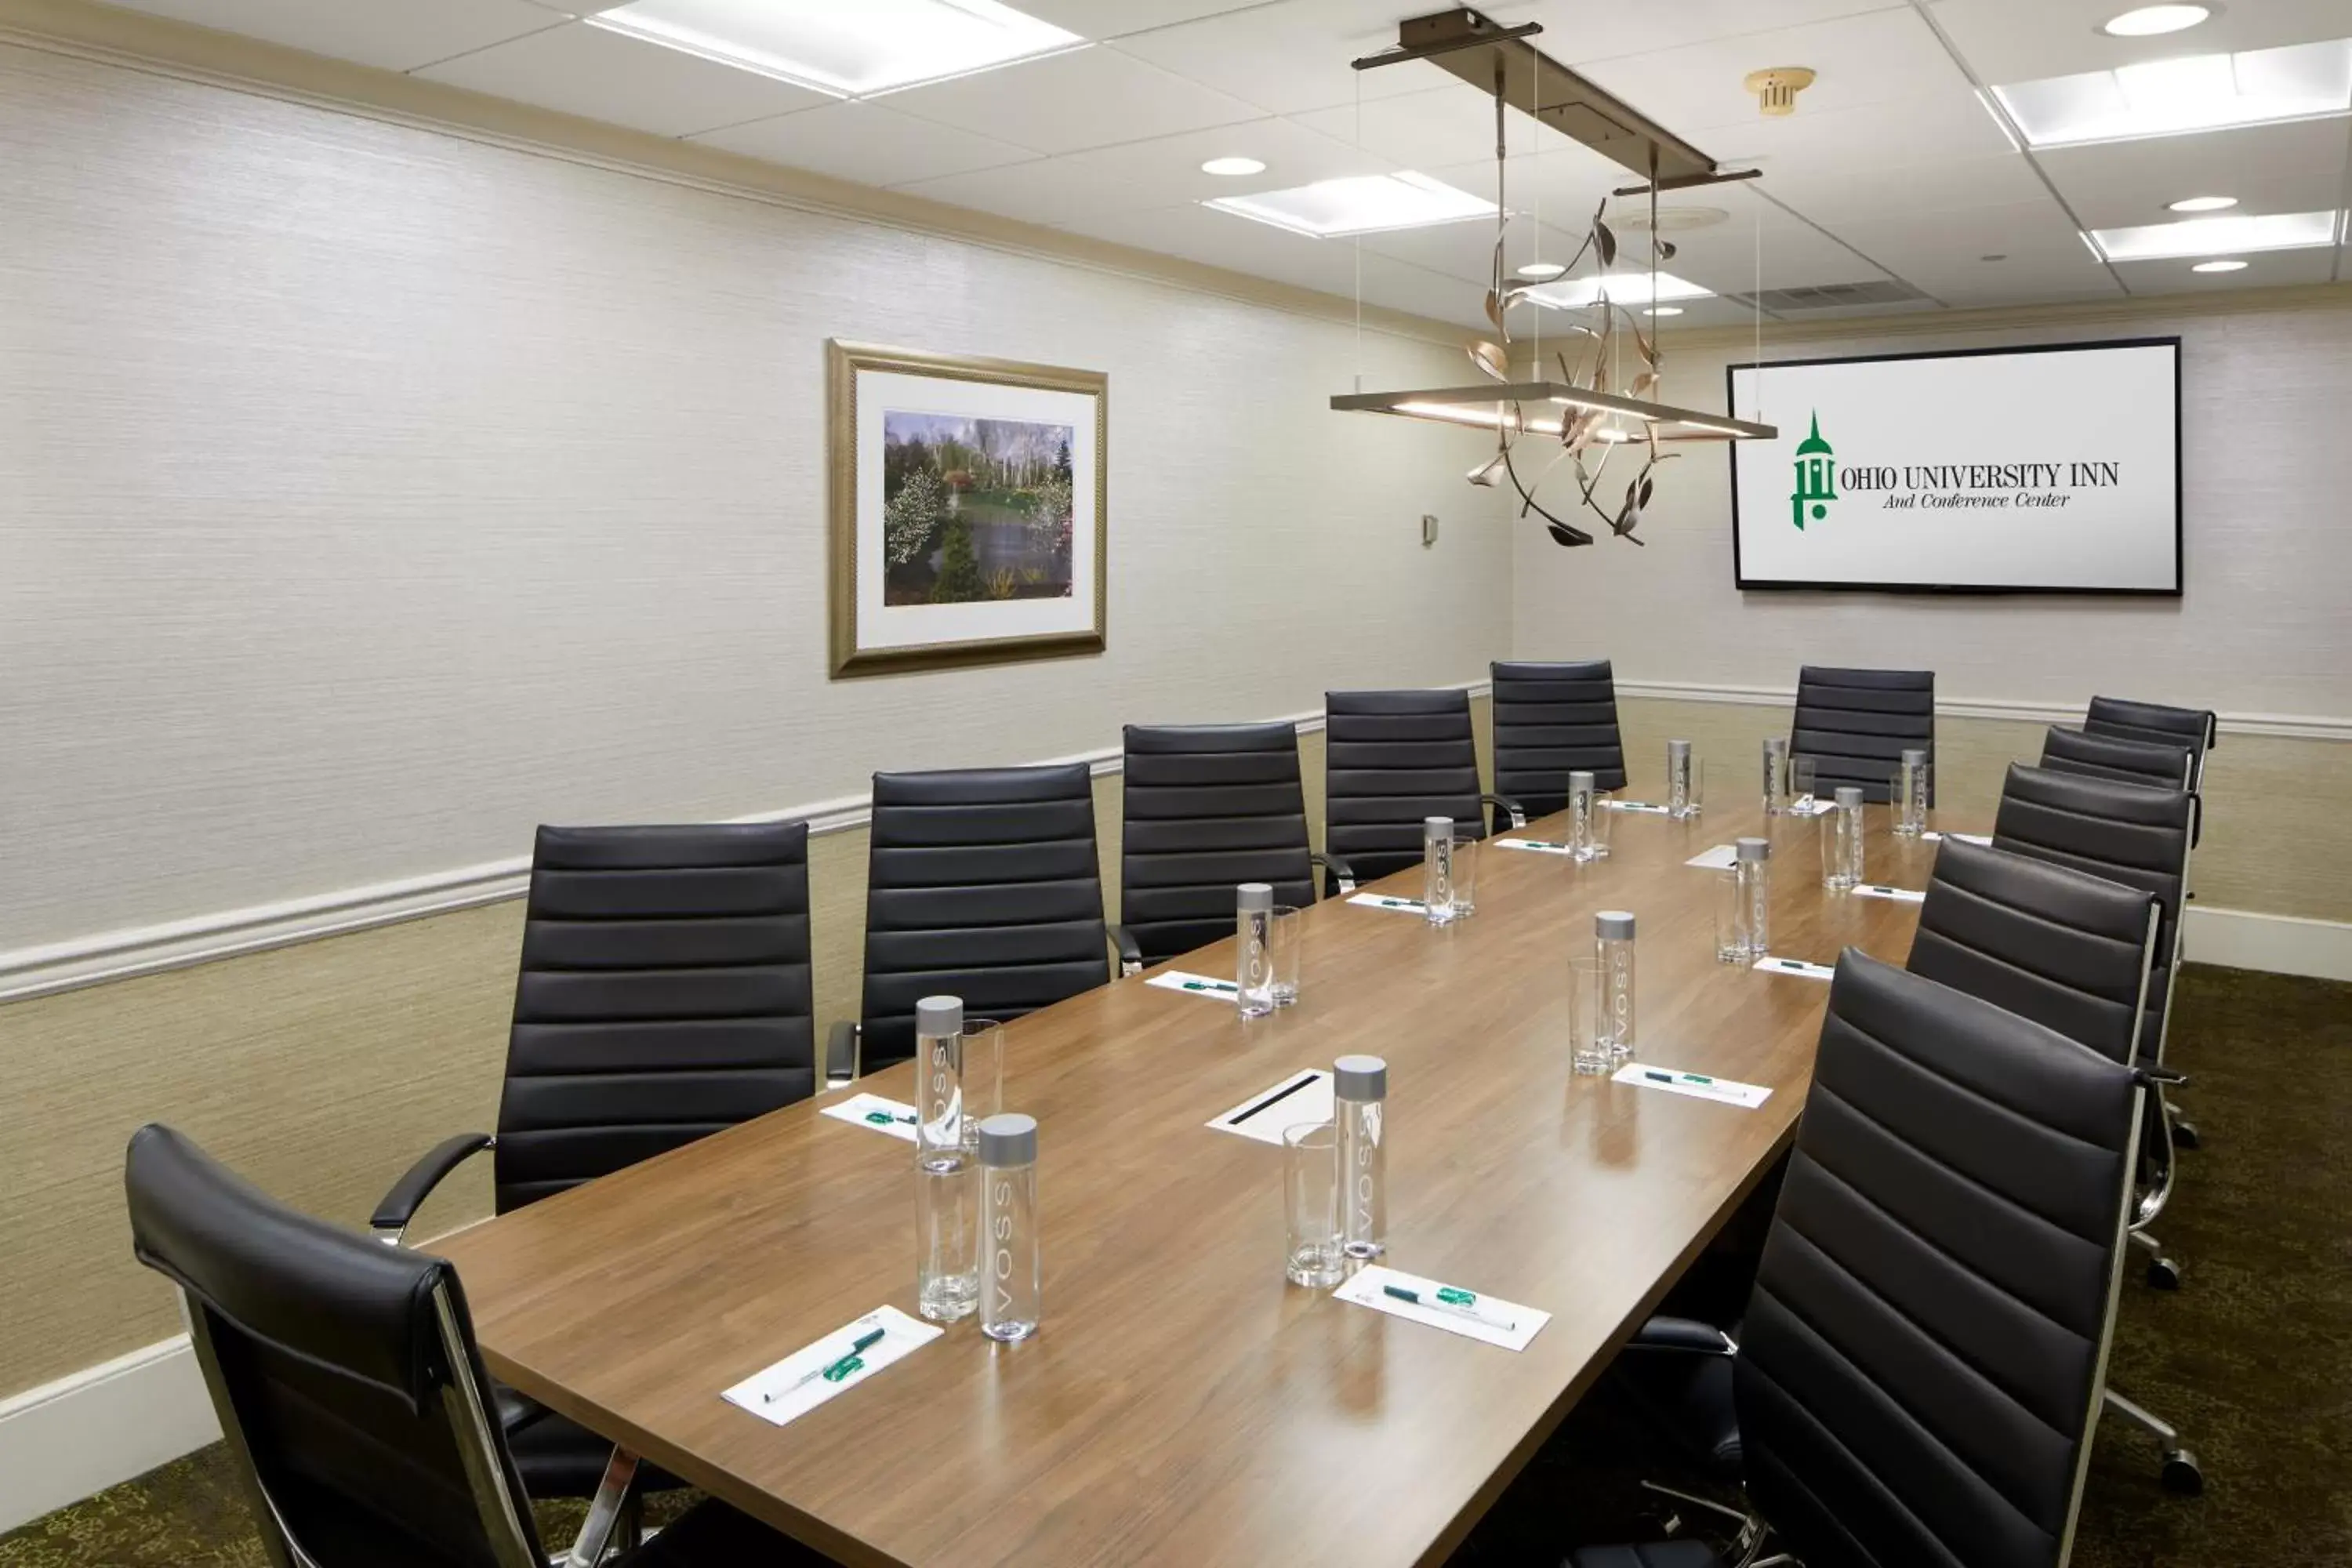 Meeting/conference room in Ohio University Inn and Conference Center